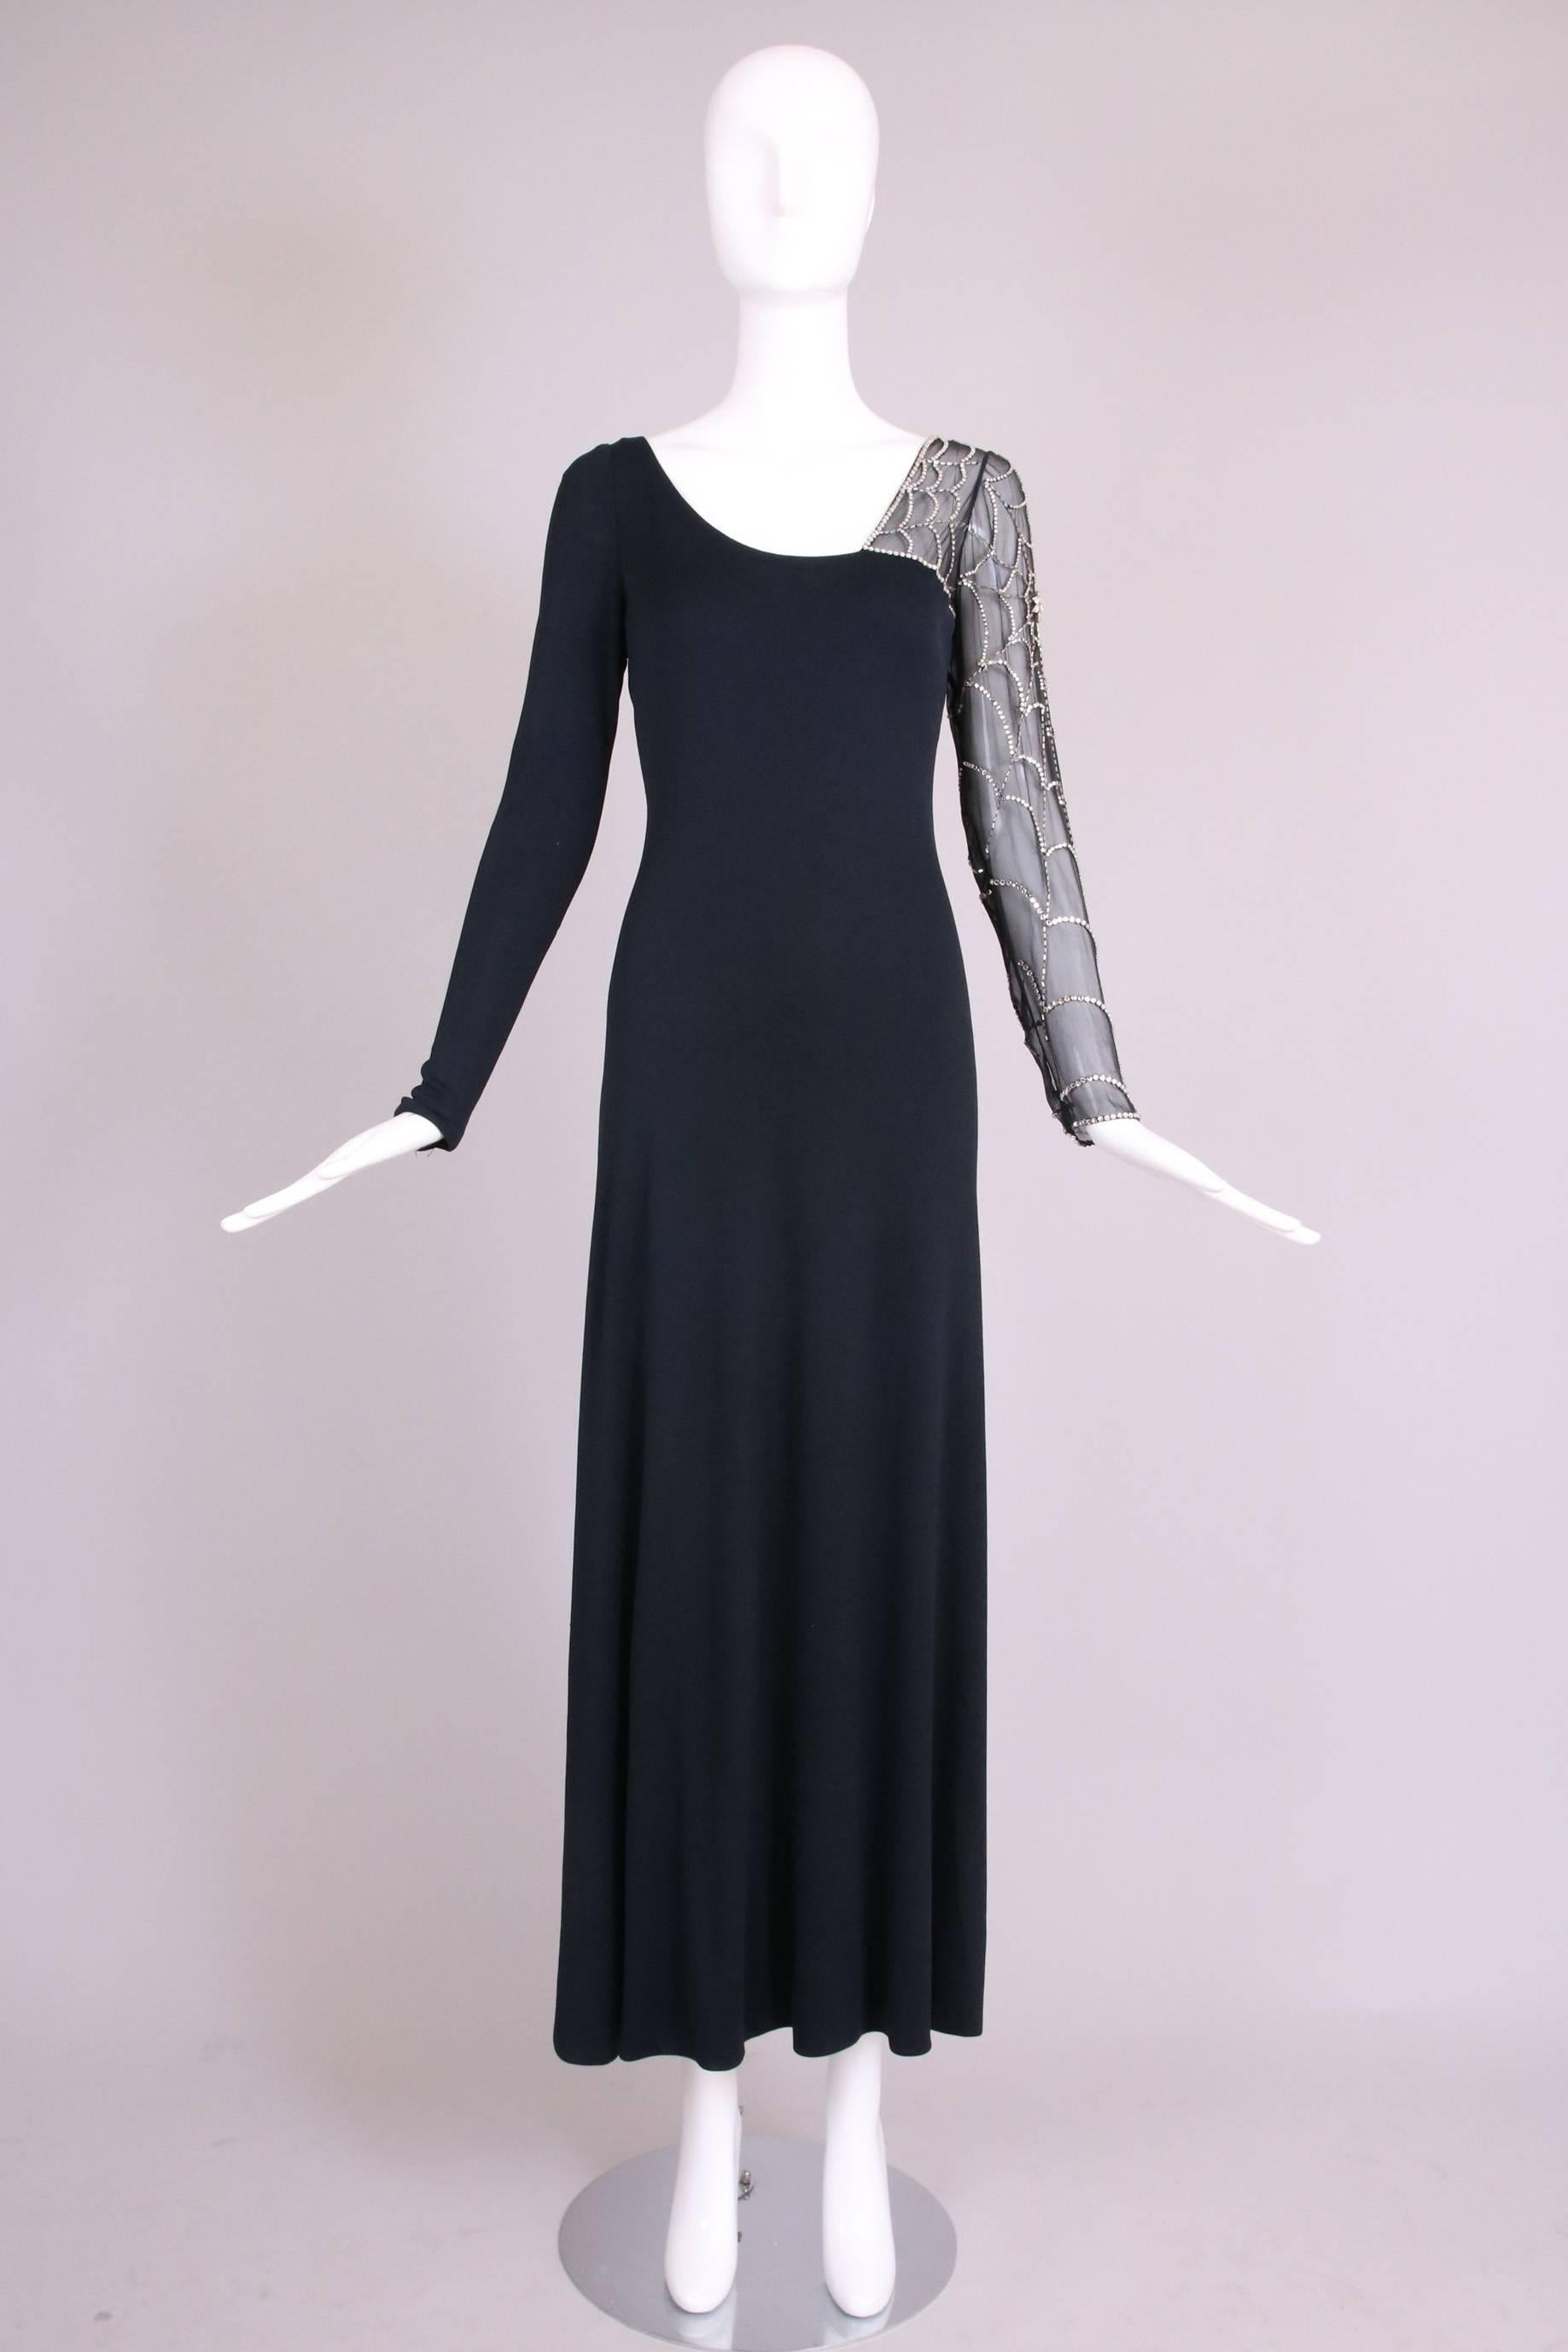 Mollie Parnis Black Silk Jersey Evening Dress Gown w/Beaded Spiderweb Sleeves In Excellent Condition In Studio City, CA